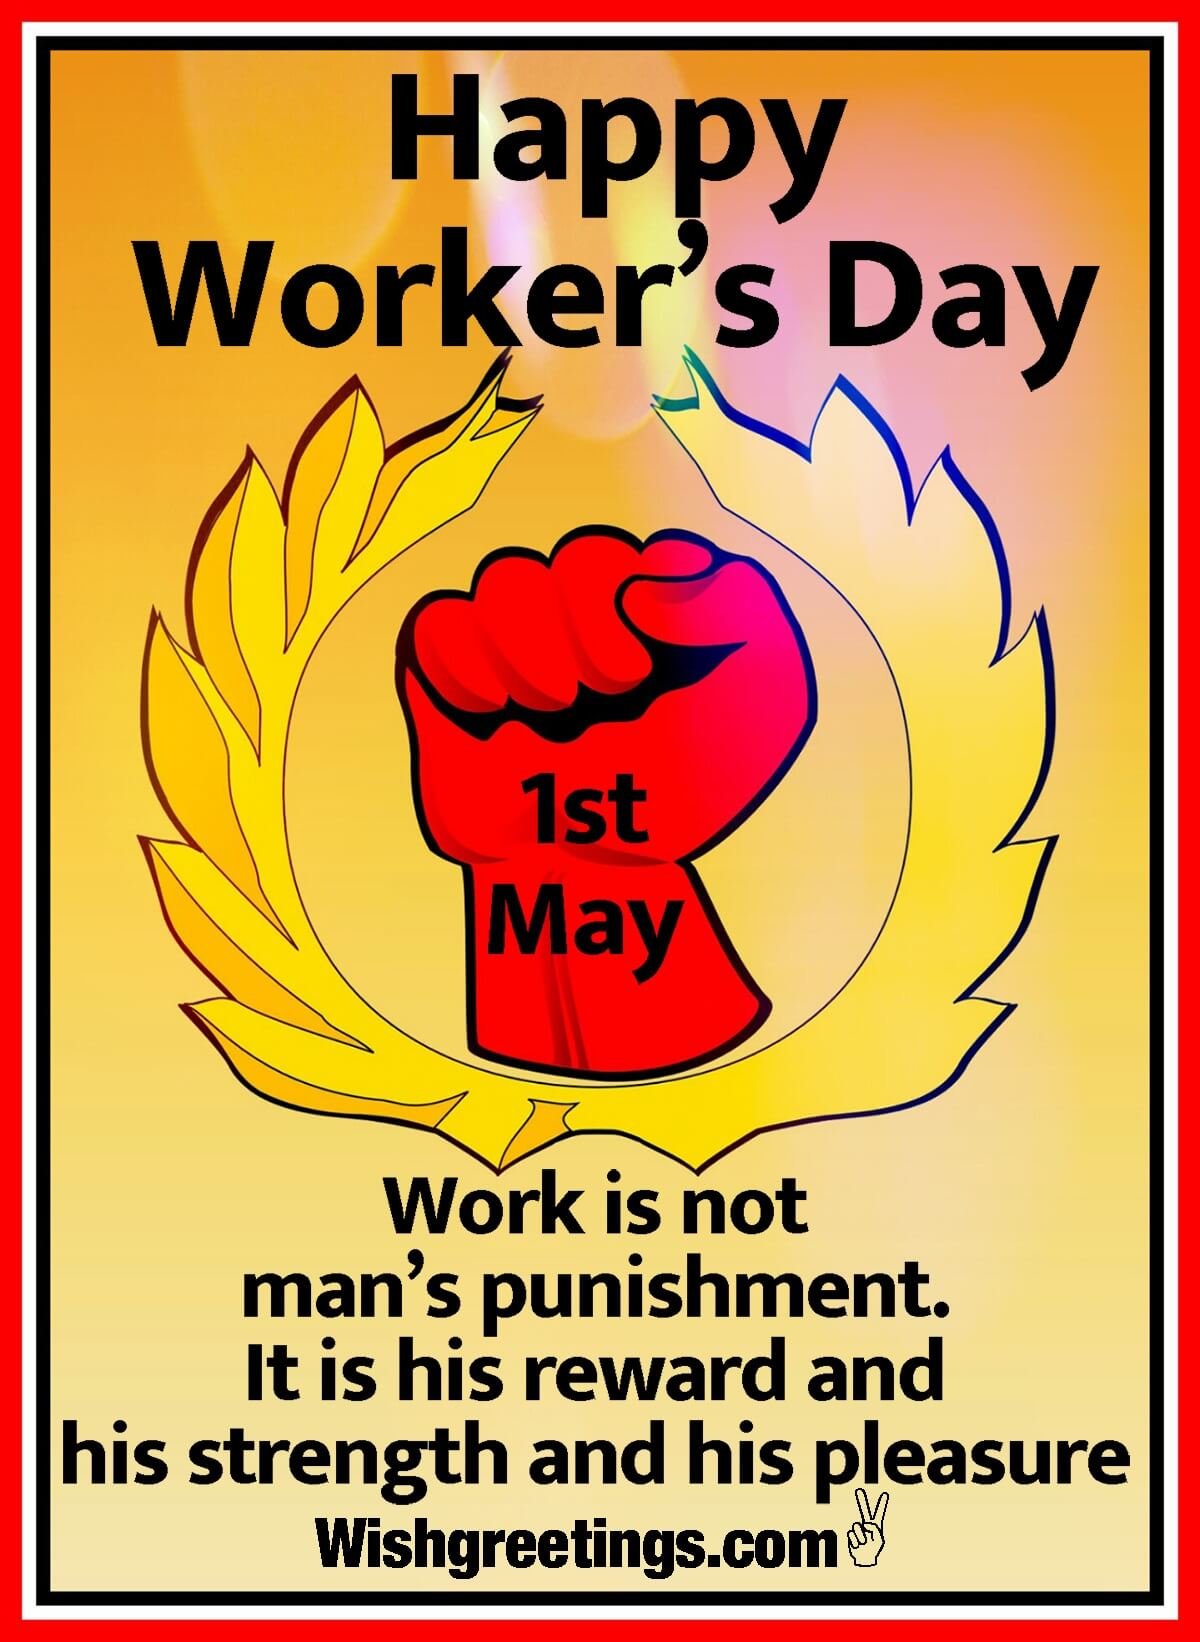 Happy Worker’s Day Greeting Card